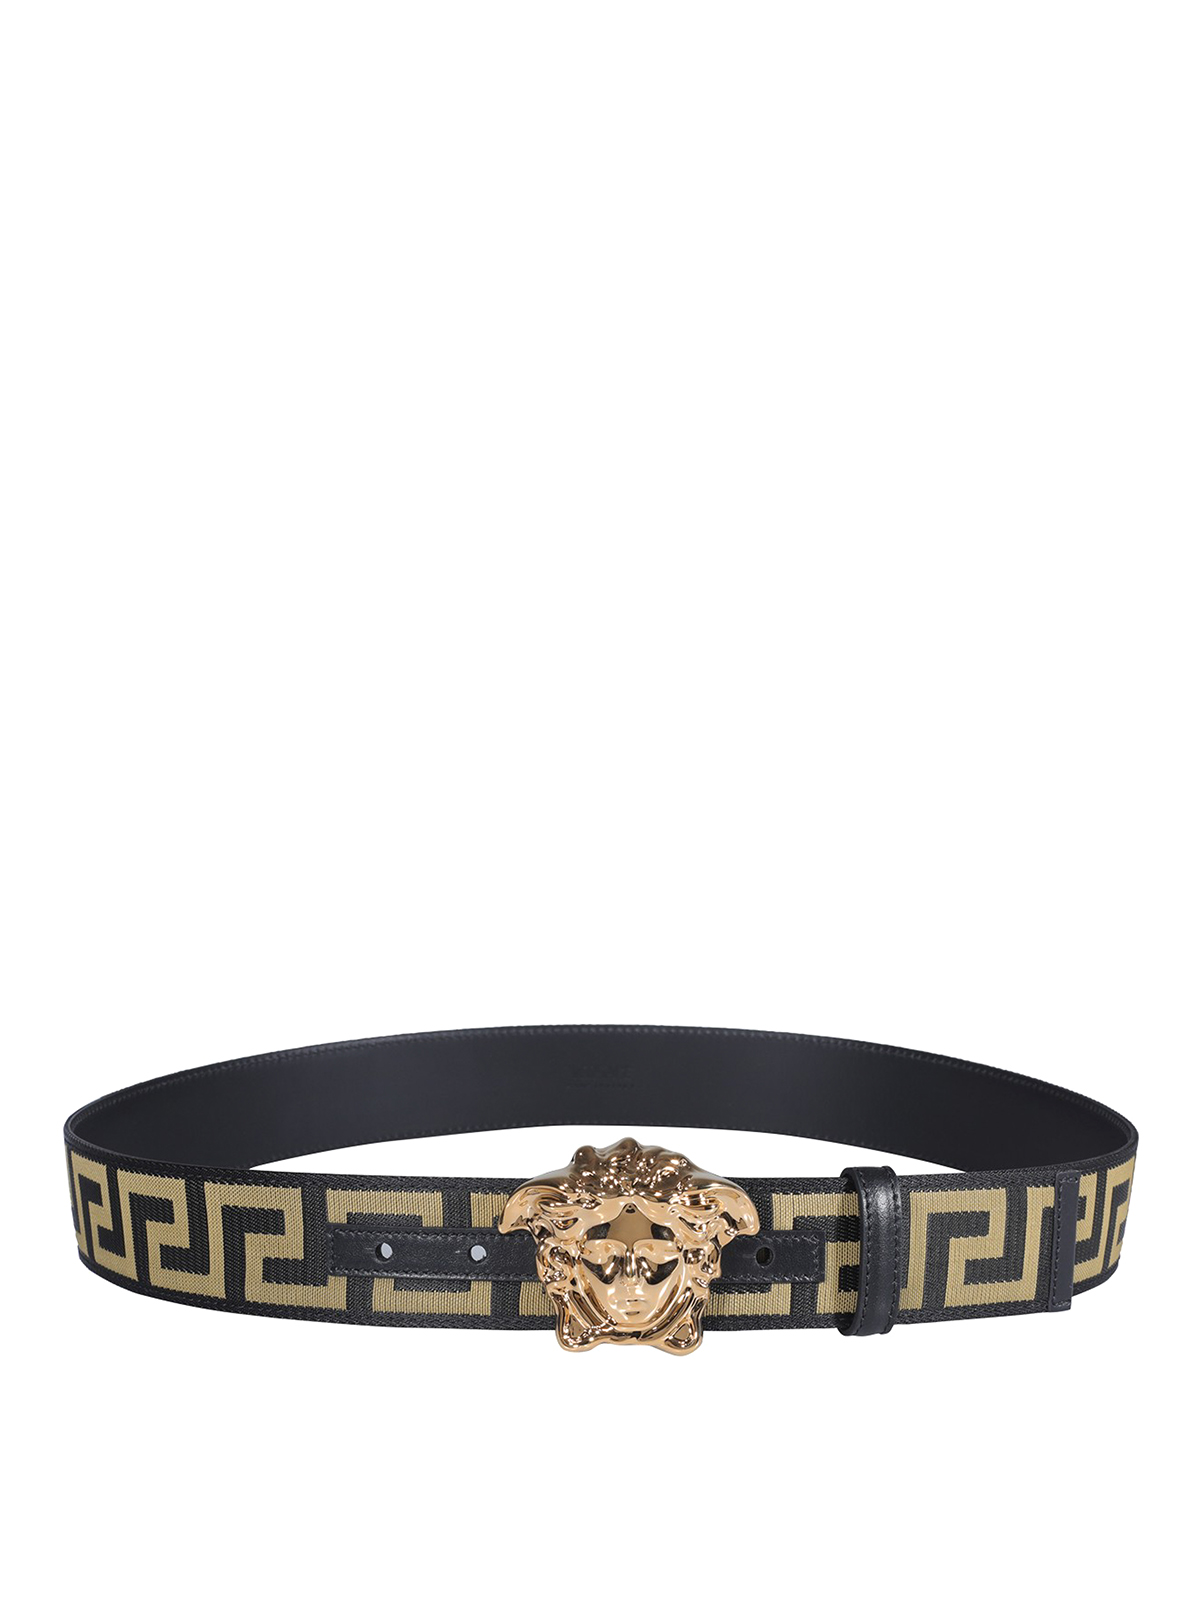 Versace - Black Leather and Beige Canvas Belt 95